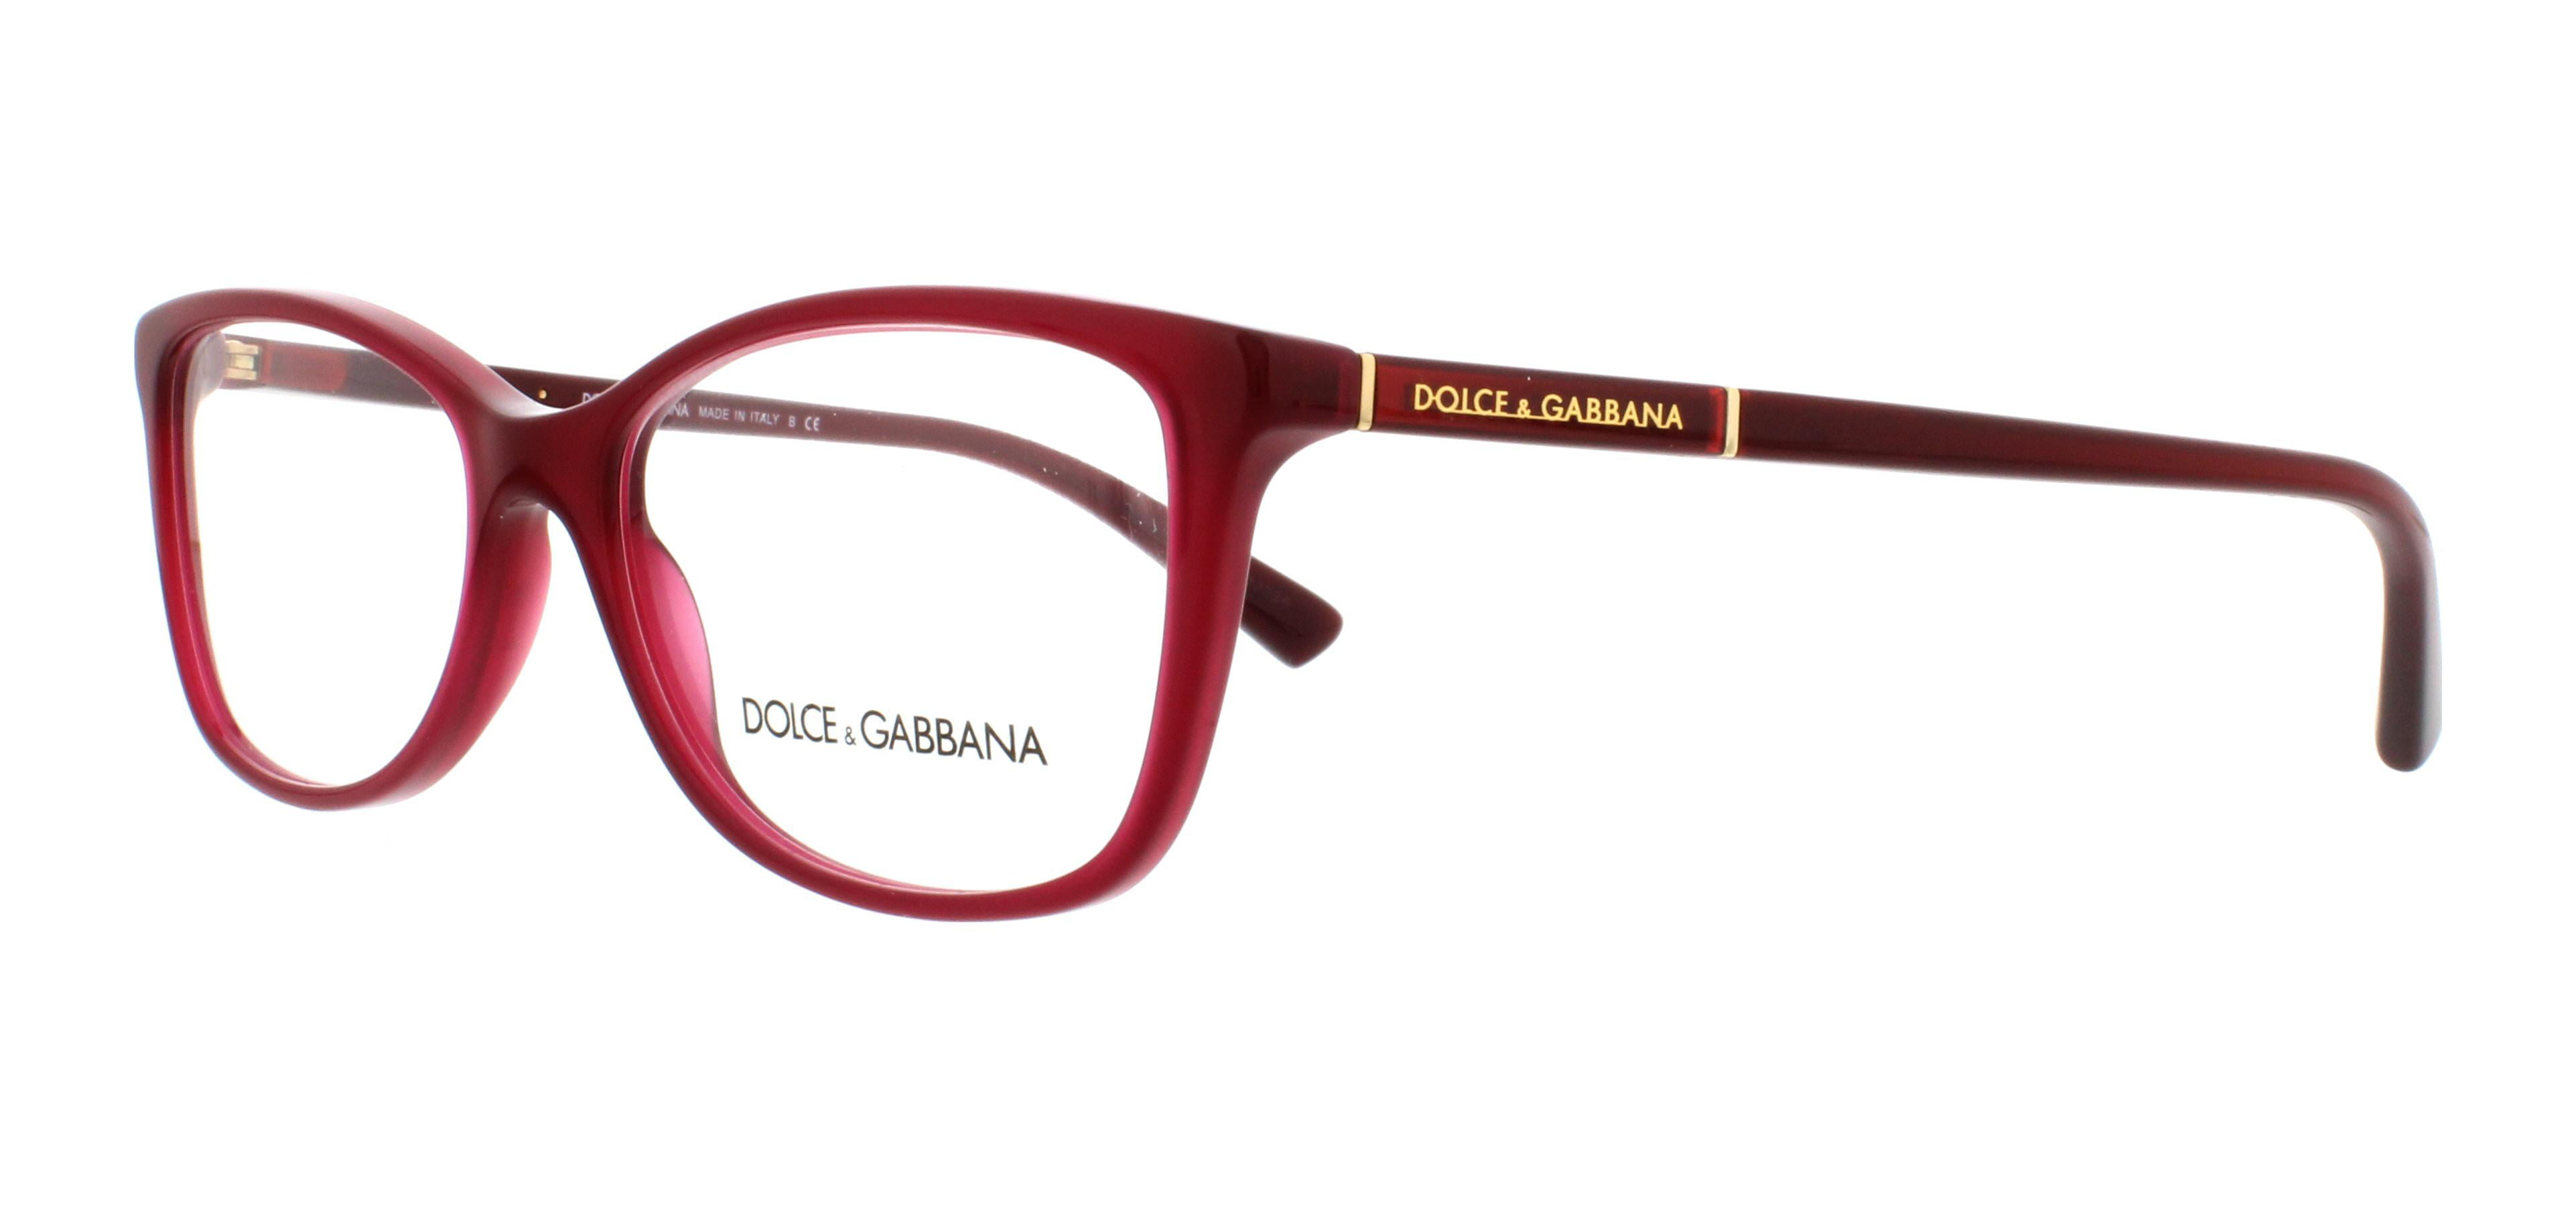 dolce and gabbana red eyeglasses